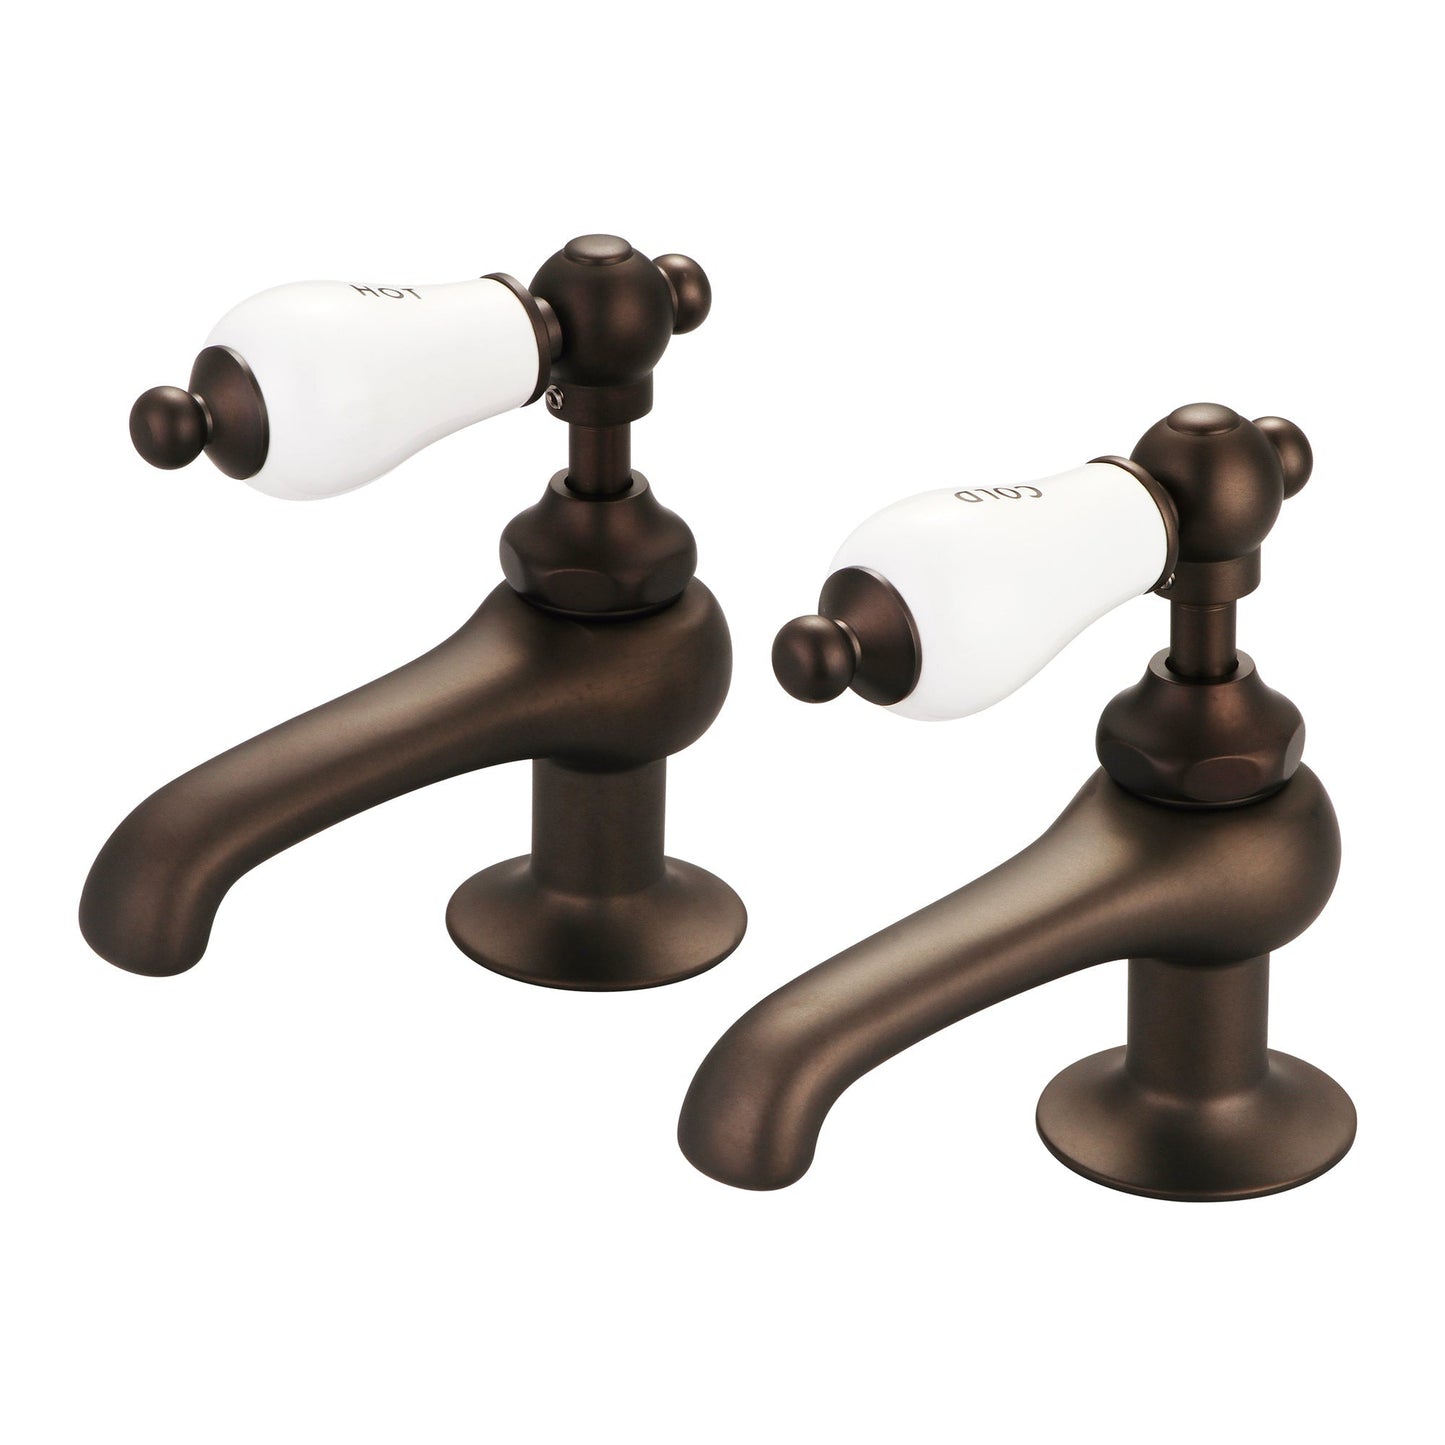 Water Creation Vintage Classic Basin Cocks Lavatory F1-0003 1.88" Brown Solid Brass Faucet With Porcelain Lever Handles, Hot And Cold Labels Included